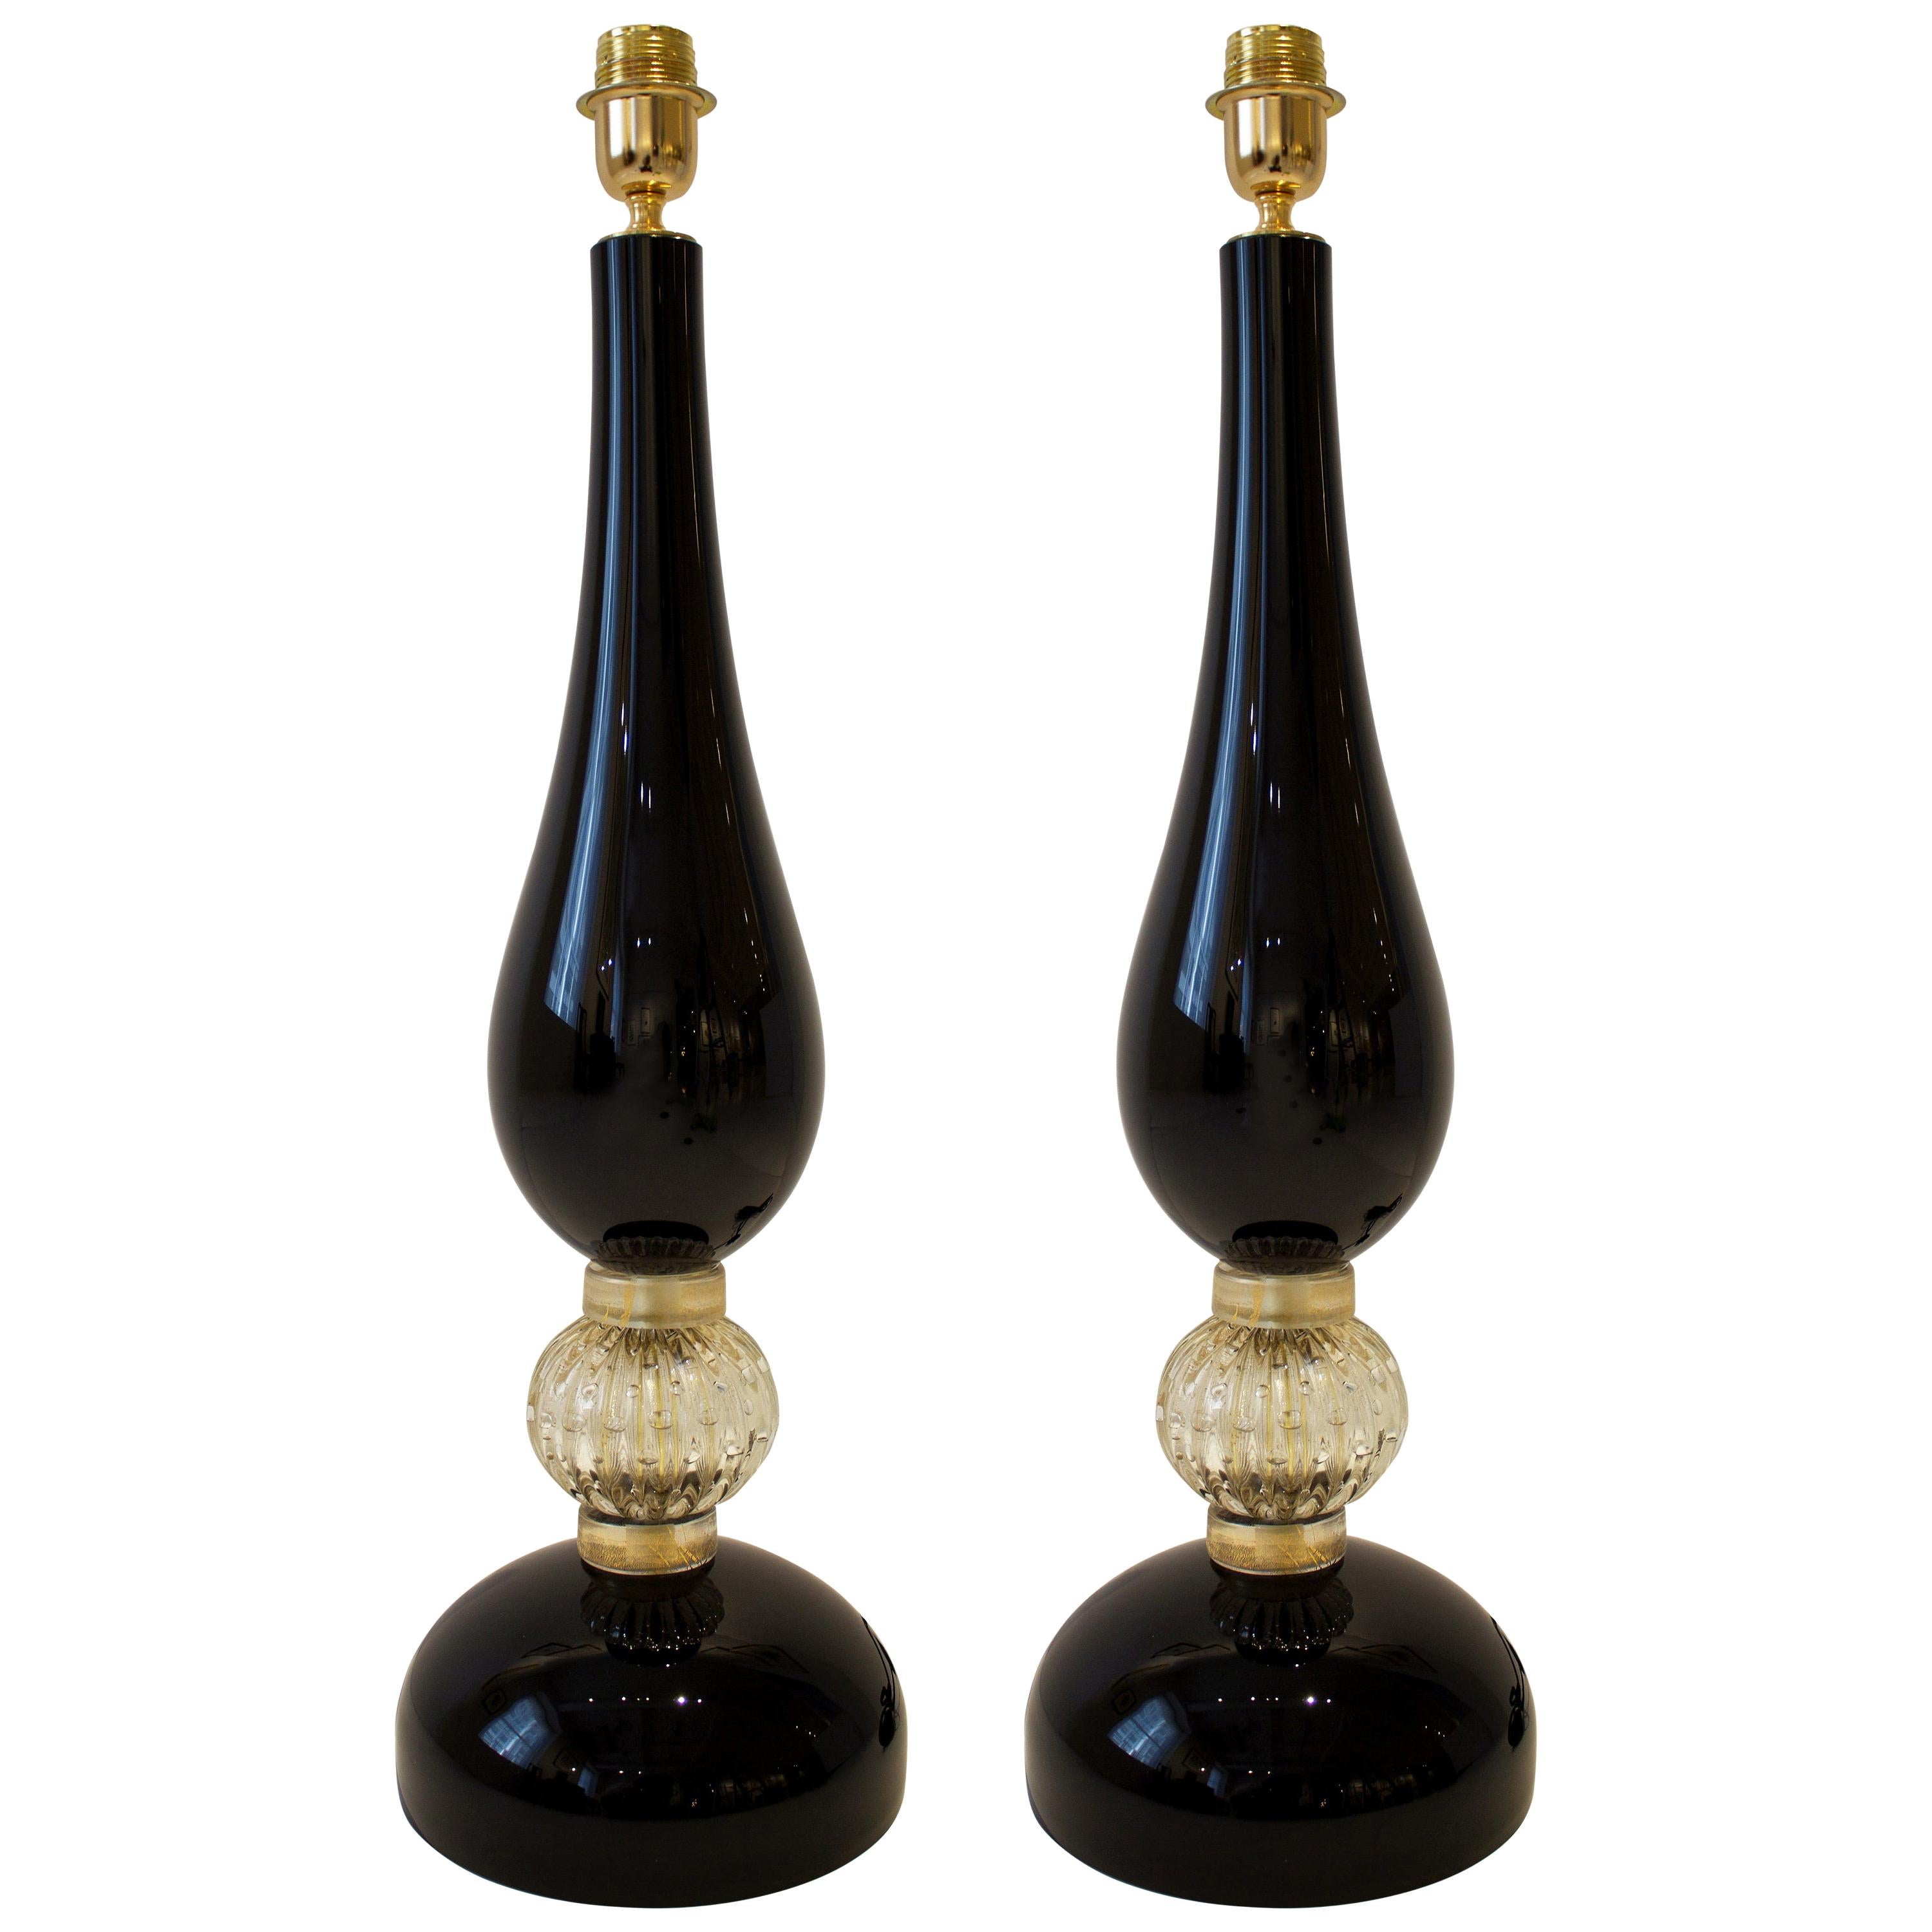 Large Pair of Black and Gold Murano Glass Lamps, Italy, Signed